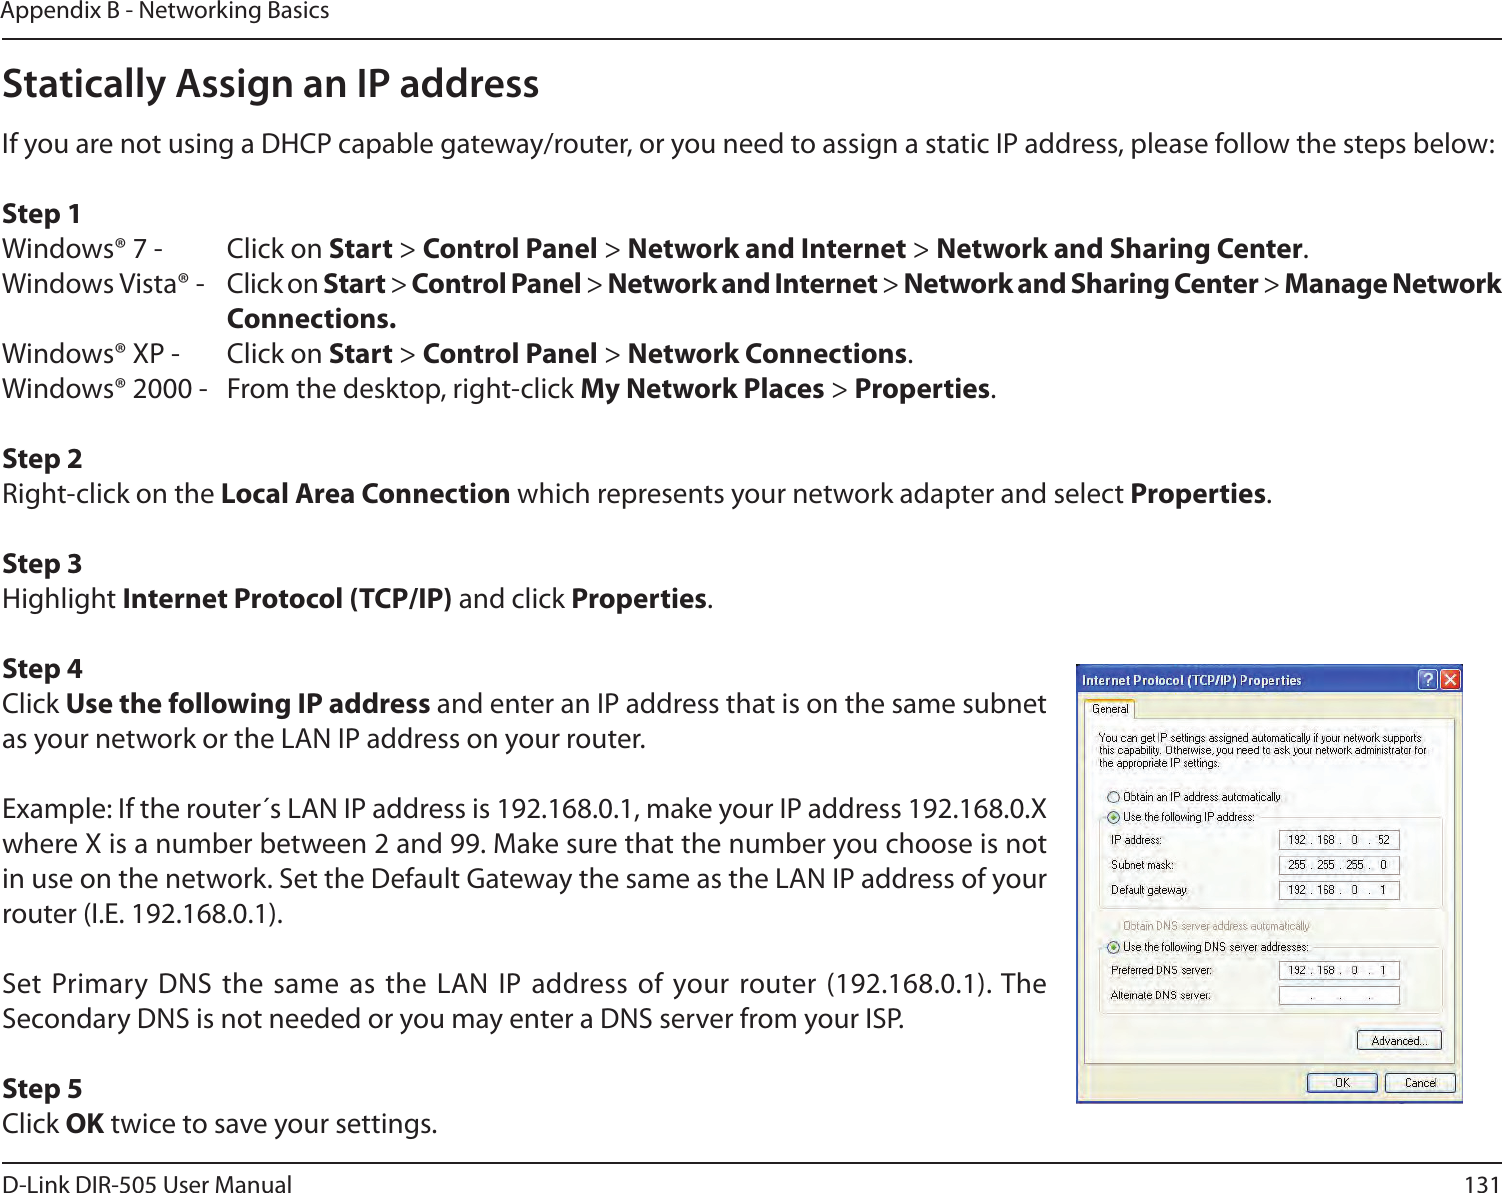 131D-Link DIR-505 User ManualAppendix B - Networking BasicsStatically Assign an IP addressIf you are not using a DHCP capable gateway/router, or you need to assign a static IP address, please follow the steps below:Step 1Windows® 7 -  Click on Start &gt; Control Panel &gt; Network and Internet &gt; Network and Sharing Center.Windows Vista® -  Click on Start &gt; Control Panel &gt; Network and Internet &gt; Network and Sharing Center &gt; Manage Network      Connections.Windows® XP -  Click on Start &gt; Control Panel &gt; Network Connections.Windows® 2000 -  From the desktop, right-click My Network Places &gt; Properties.Step 2Right-click on the Local Area Connection which represents your network adapter and select Properties.Step 3Highlight Internet Protocol (TCP/IP) and click Properties.Step 4Click Use the following IP address and enter an IP address that is on the same subnet as your network or the LAN IP address on your router. Example: If the router´s LAN IP address is 192.168.0.1, make your IP address 192.168.0.X where X is a number between 2 and 99. Make sure that the number you choose is not in use on the network. Set the Default Gateway the same as the LAN IP address of your router (I.E. 192.168.0.1). Set Primary DNS the  same as the LAN  IP address of your router (192.168.0.1). The Secondary DNS is not needed or you may enter a DNS server from your ISP.Step 5Click OK twice to save your settings.